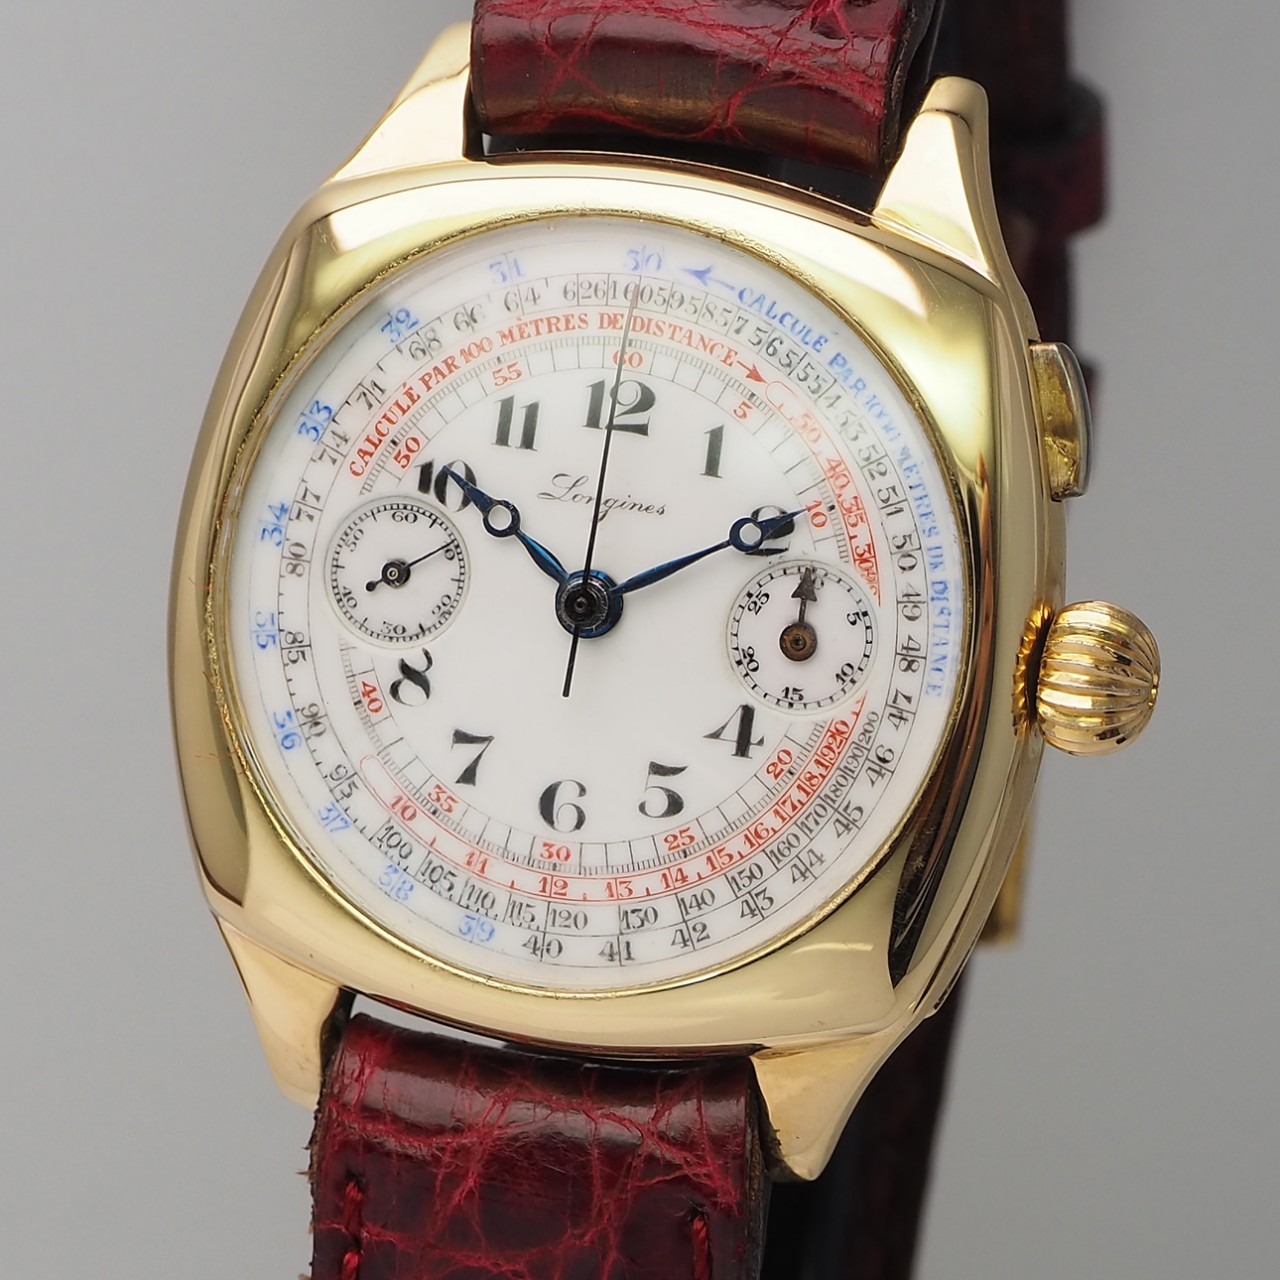 Longines vintage Chronograph 13.33 / 1935 -Gold 18k/750, Serviced+ Archiv-Extract -ULTRA RARE